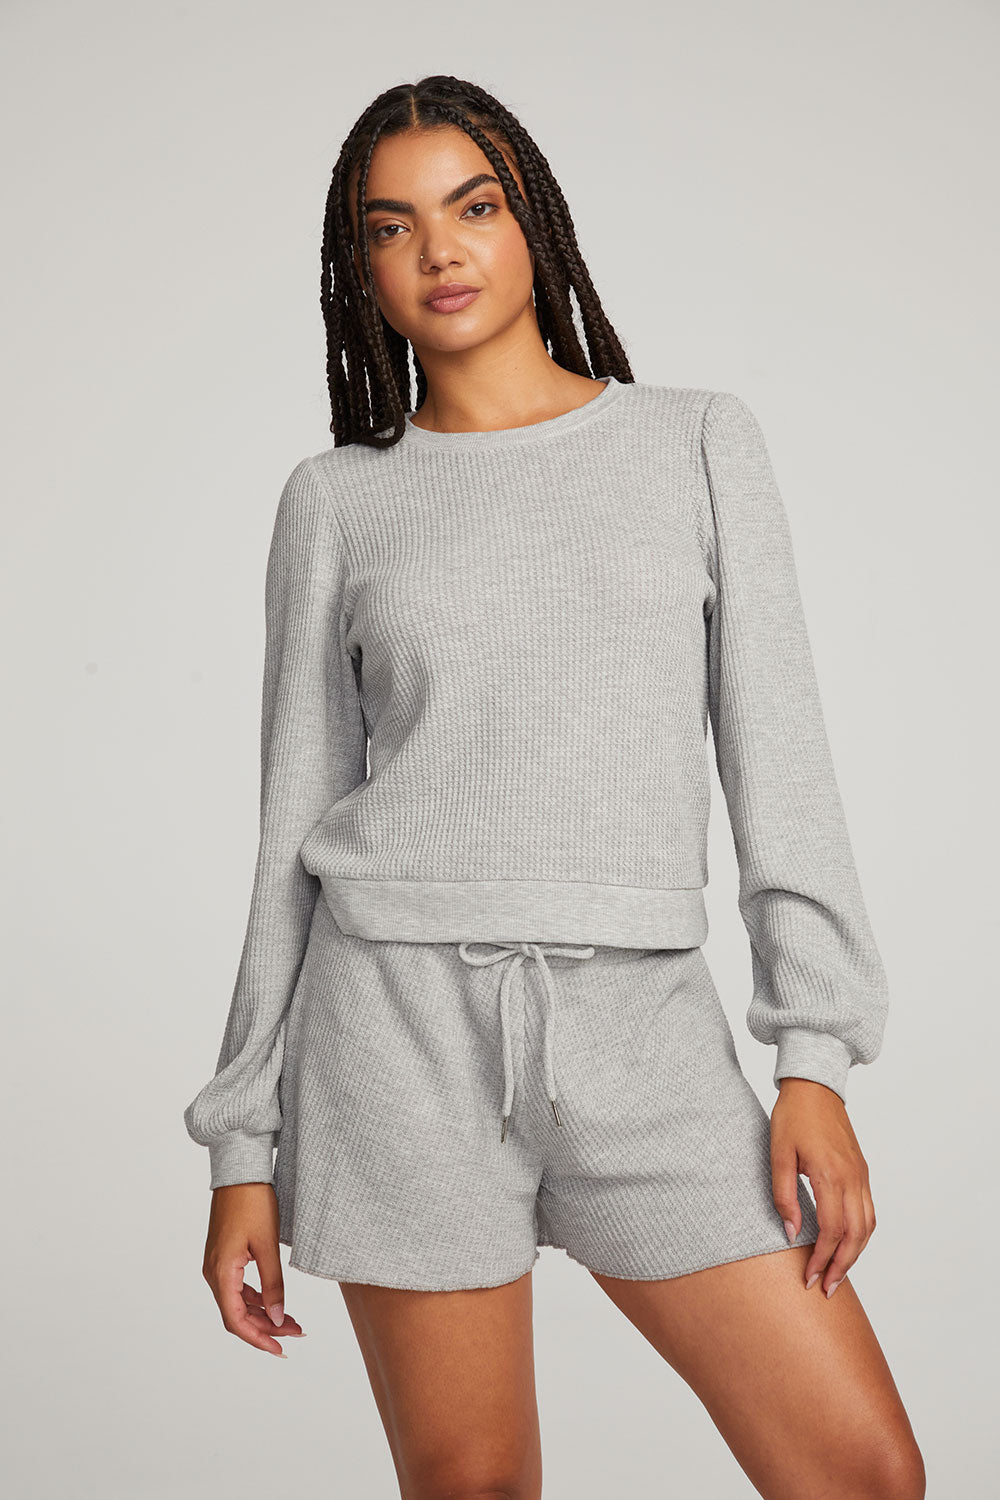 Owlsey Grey Marl Pullover WOMENS chaserbrand